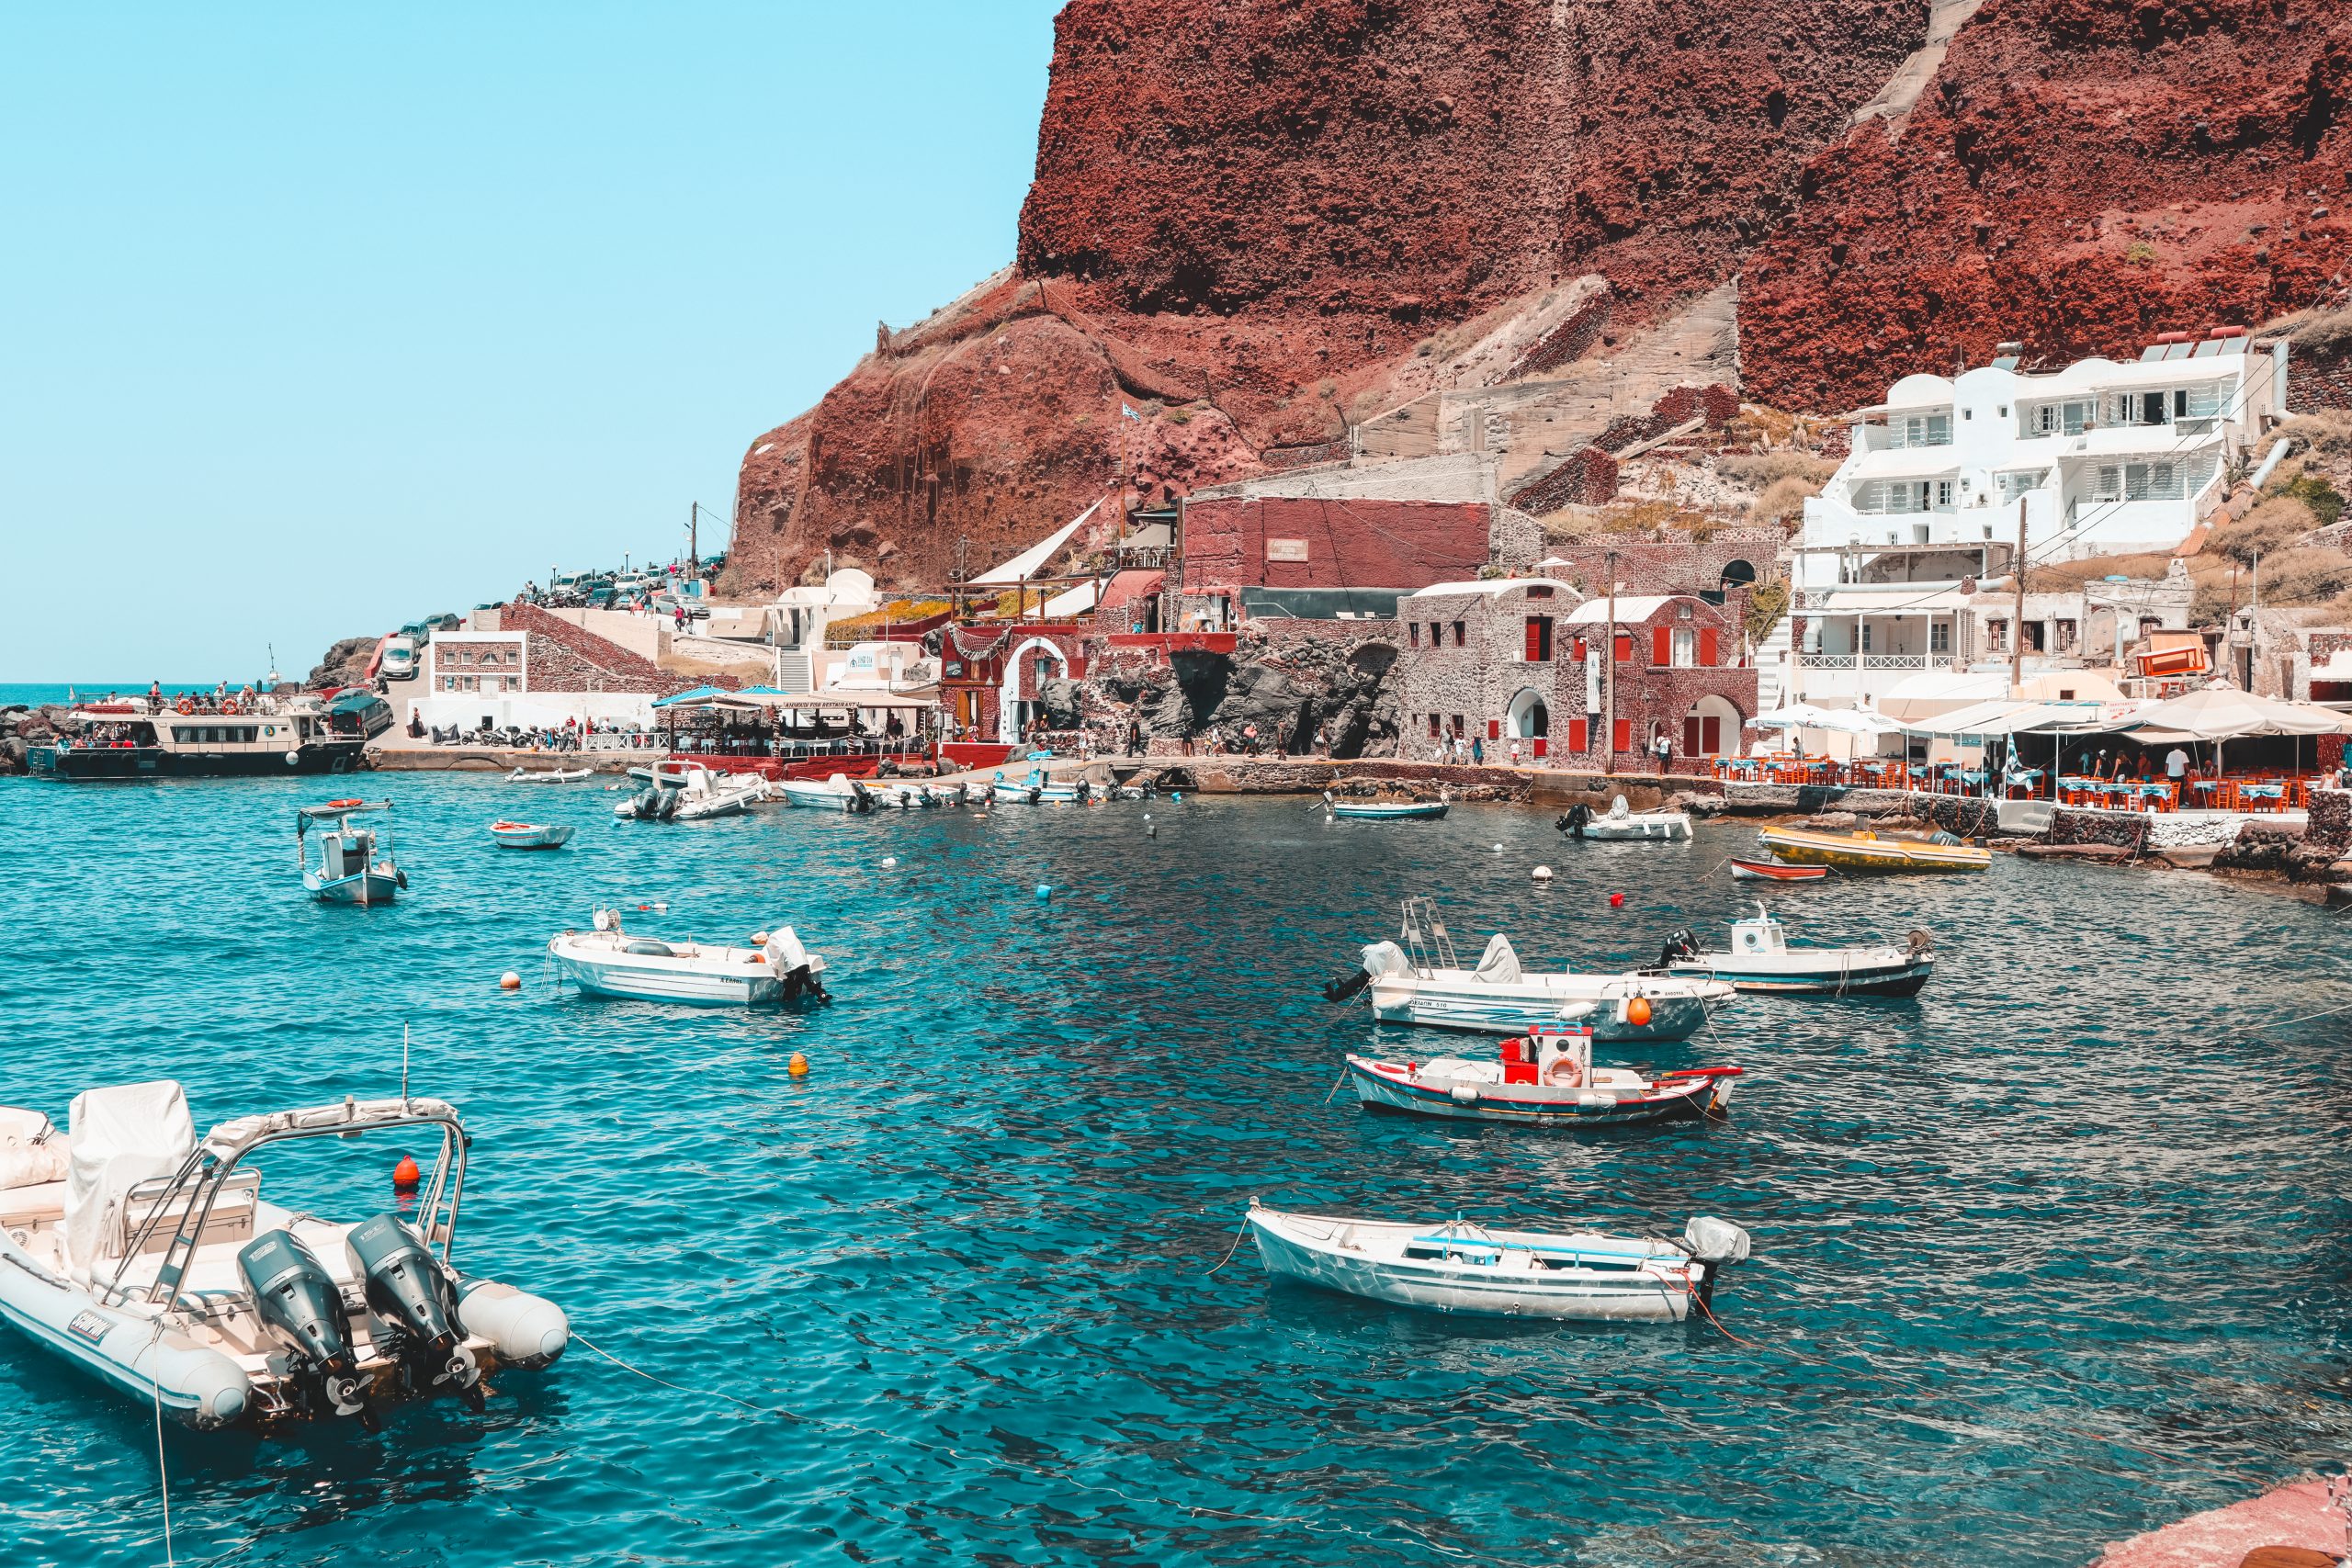 Boats docked by Ammoudi Bay with red cliffs in the background.